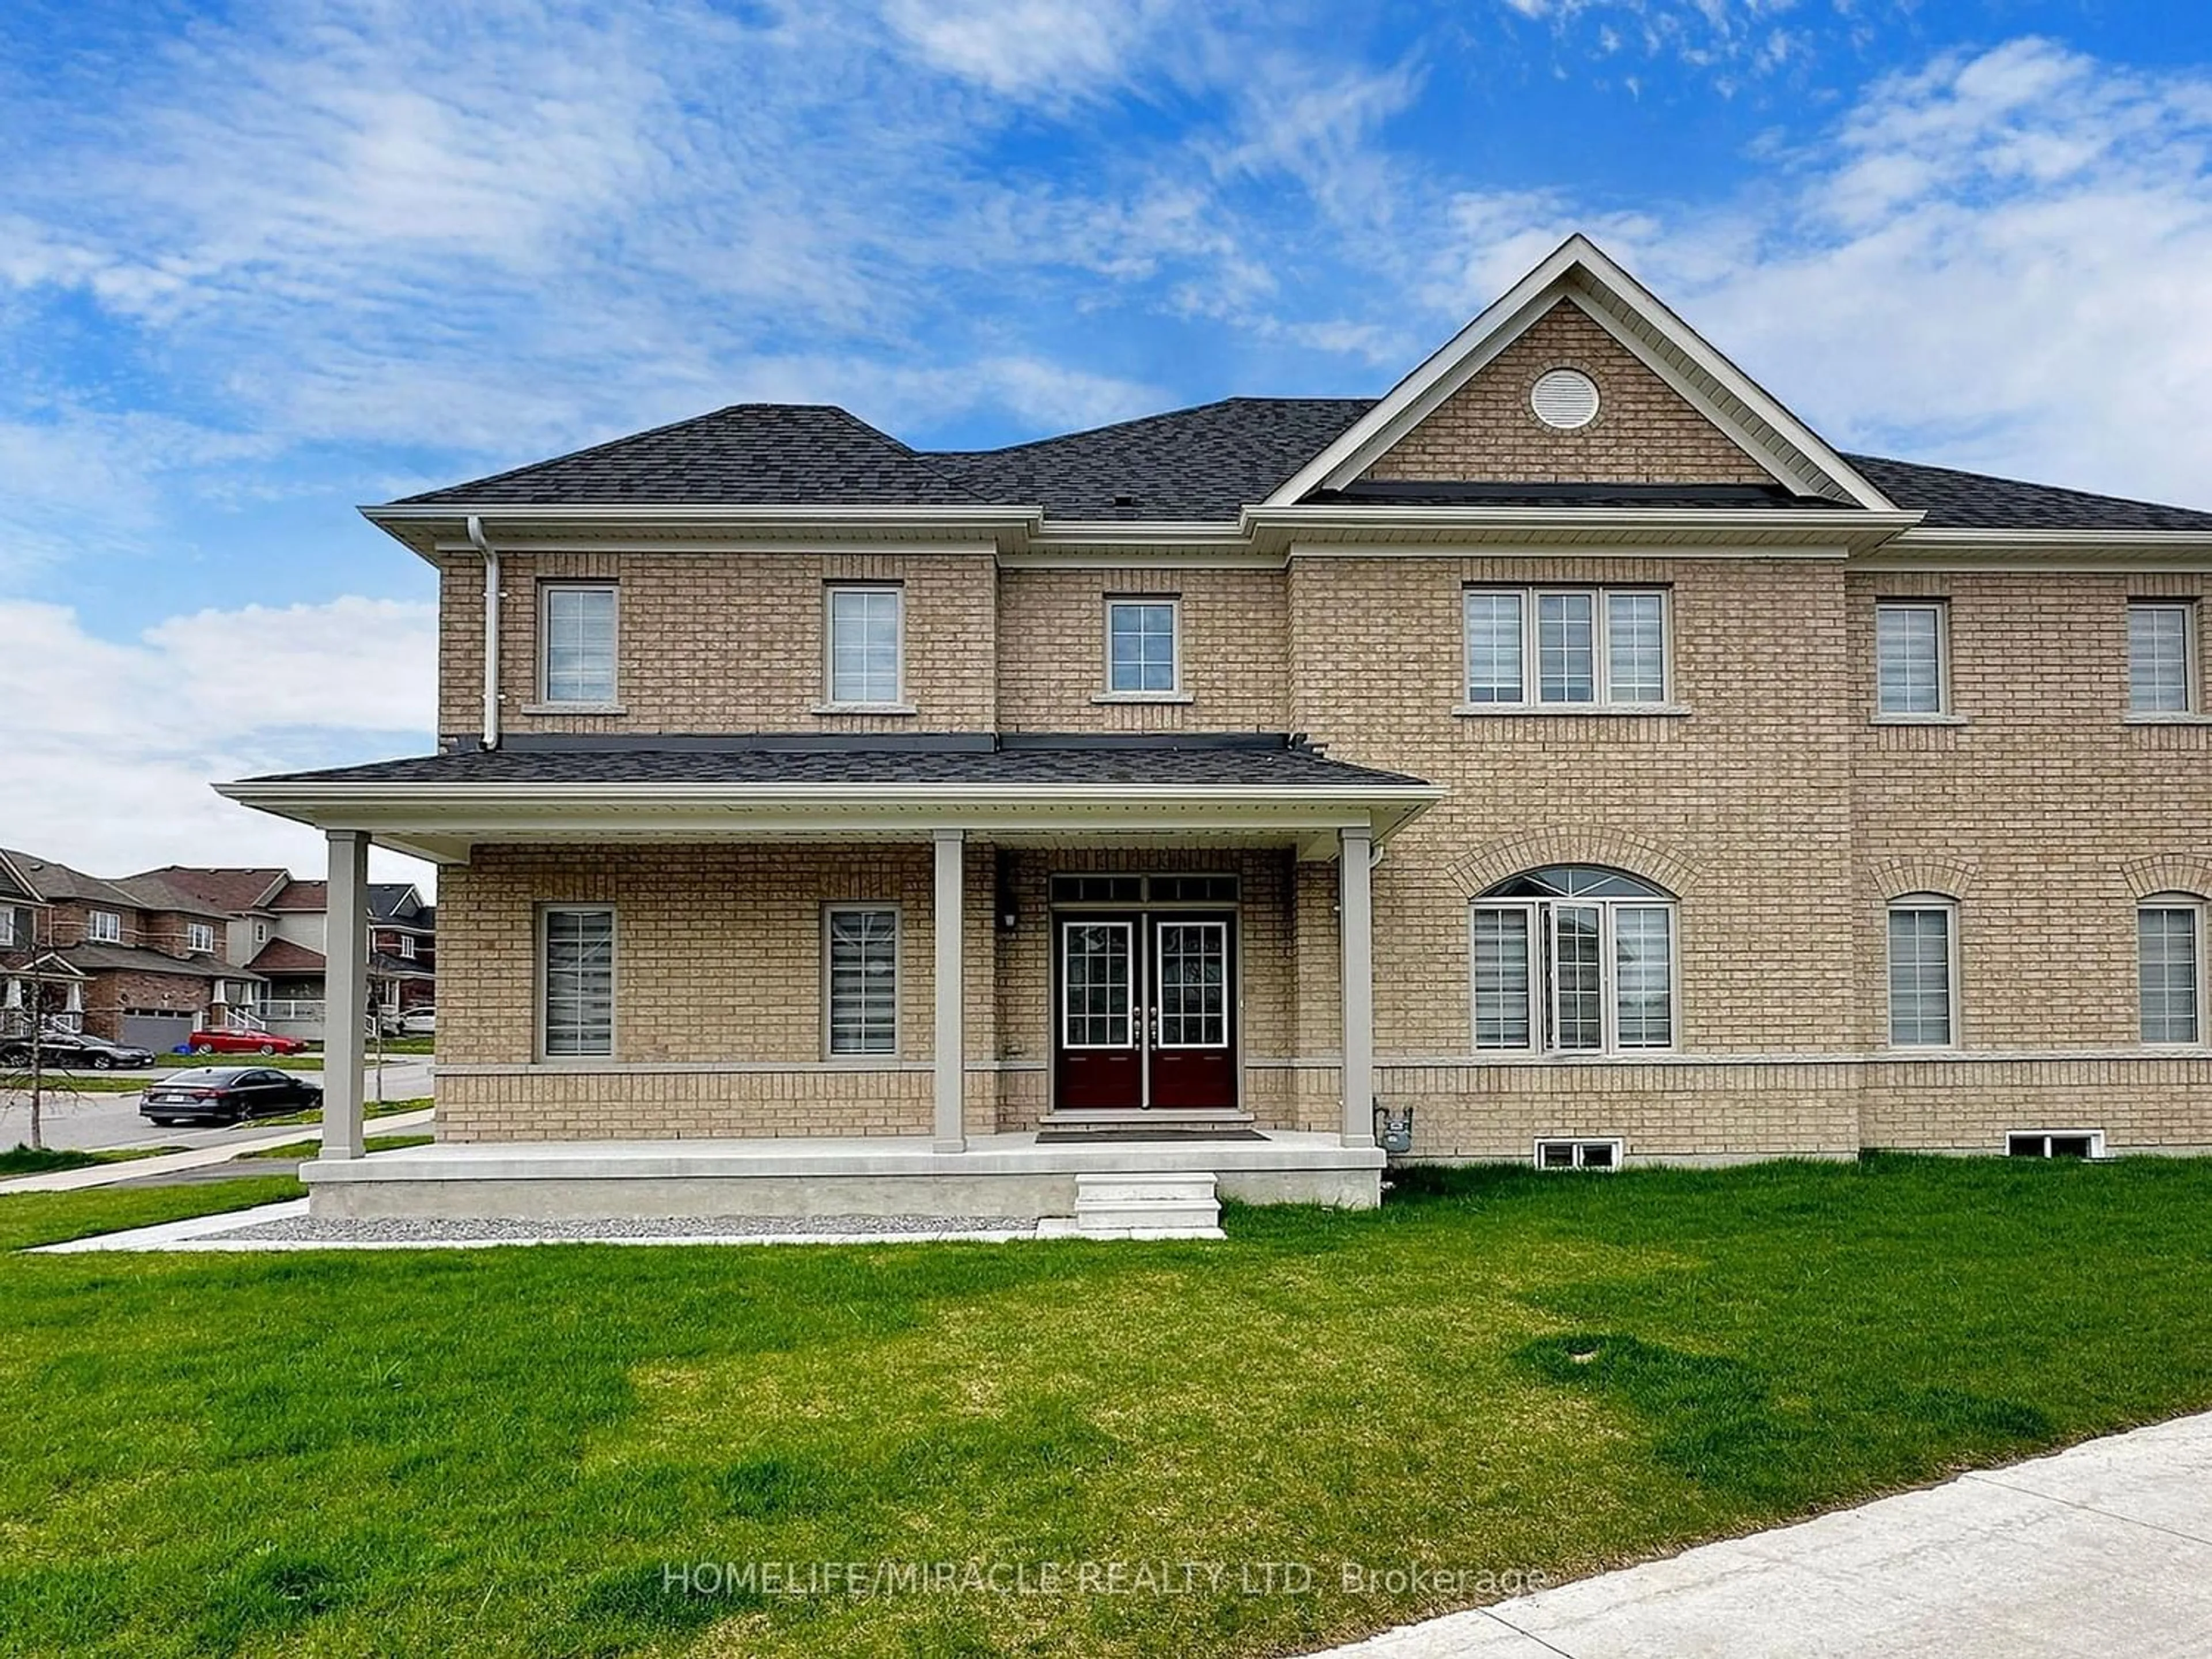 Home with brick exterior material for 2616 Standardbred Dr, Oshawa Ontario L1L 0H8